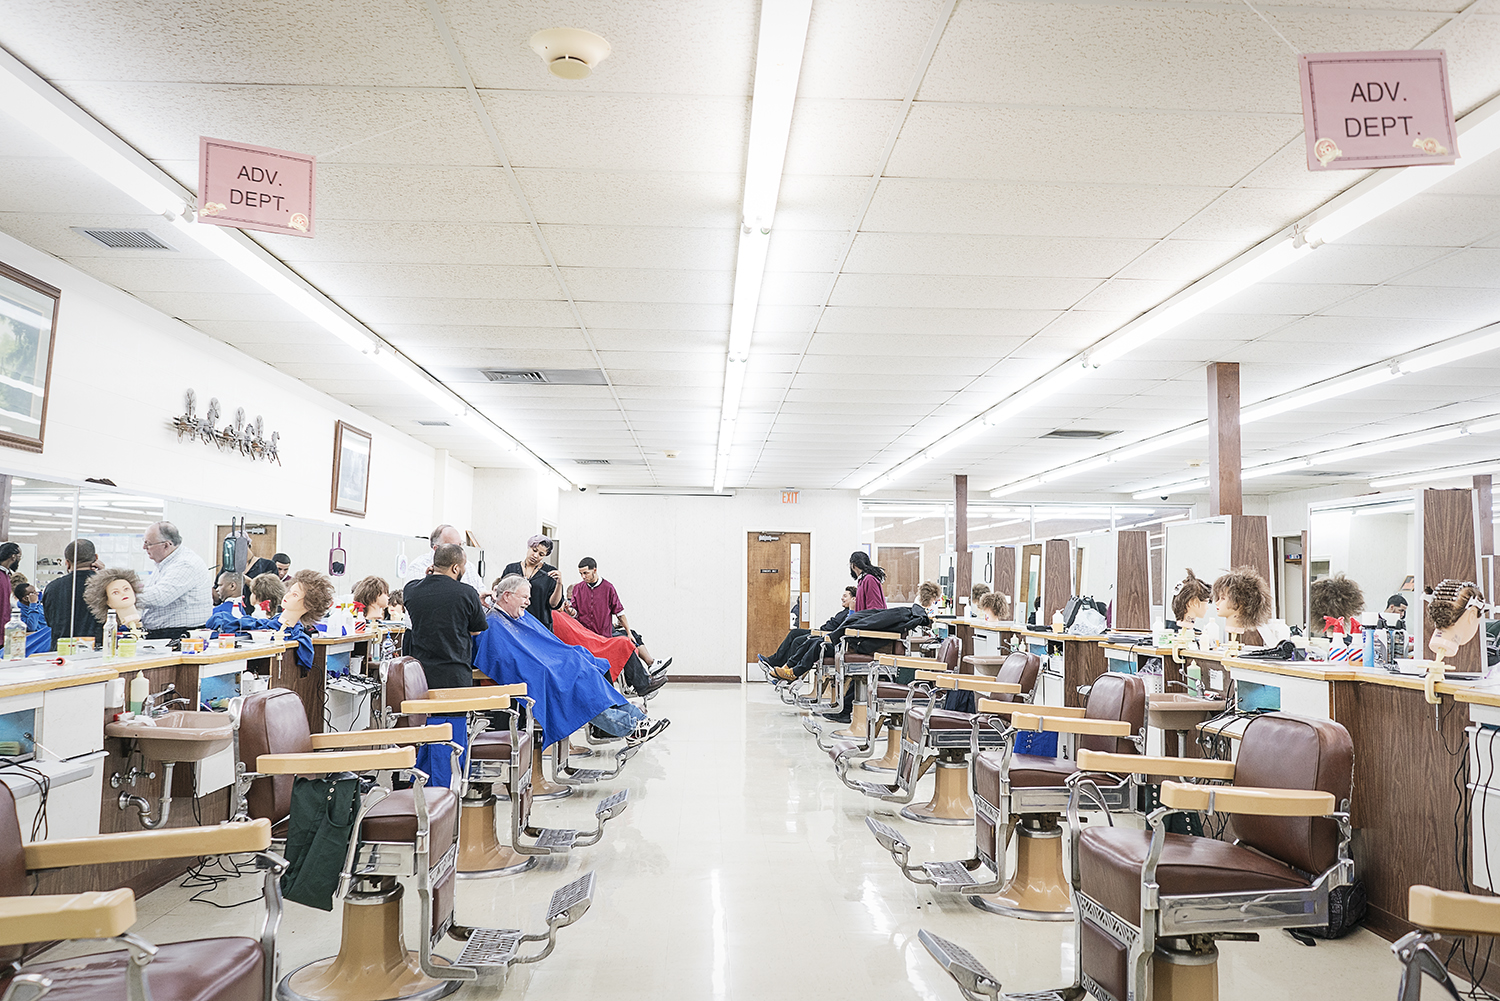 Flint, MI - Tuesday, February 6, 2018: Just after lunch on a slow Tuesday, students cut the hair of other students and other walk-in customers at the Flint Institute of Barbering.